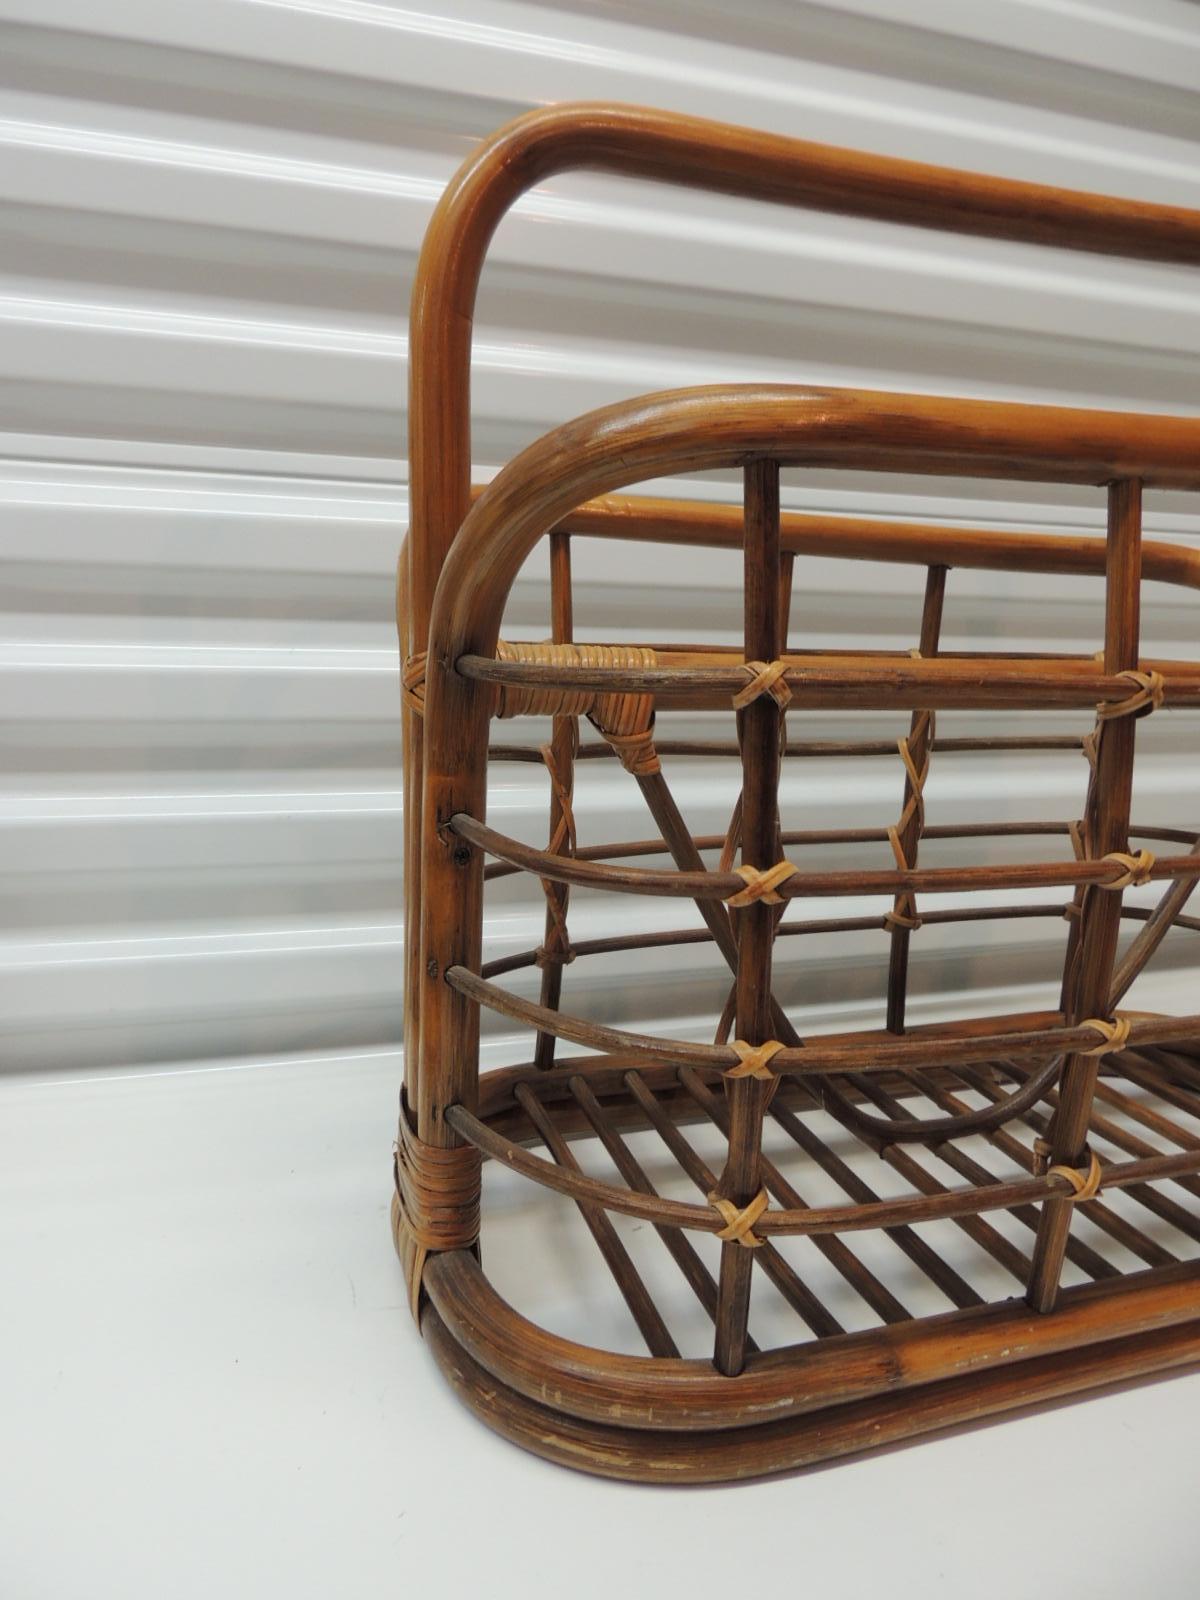 Large vintage bent bamboo magazine rack or bookstand with handle
Woven design with details in rattan in the middle divider
Size: 20